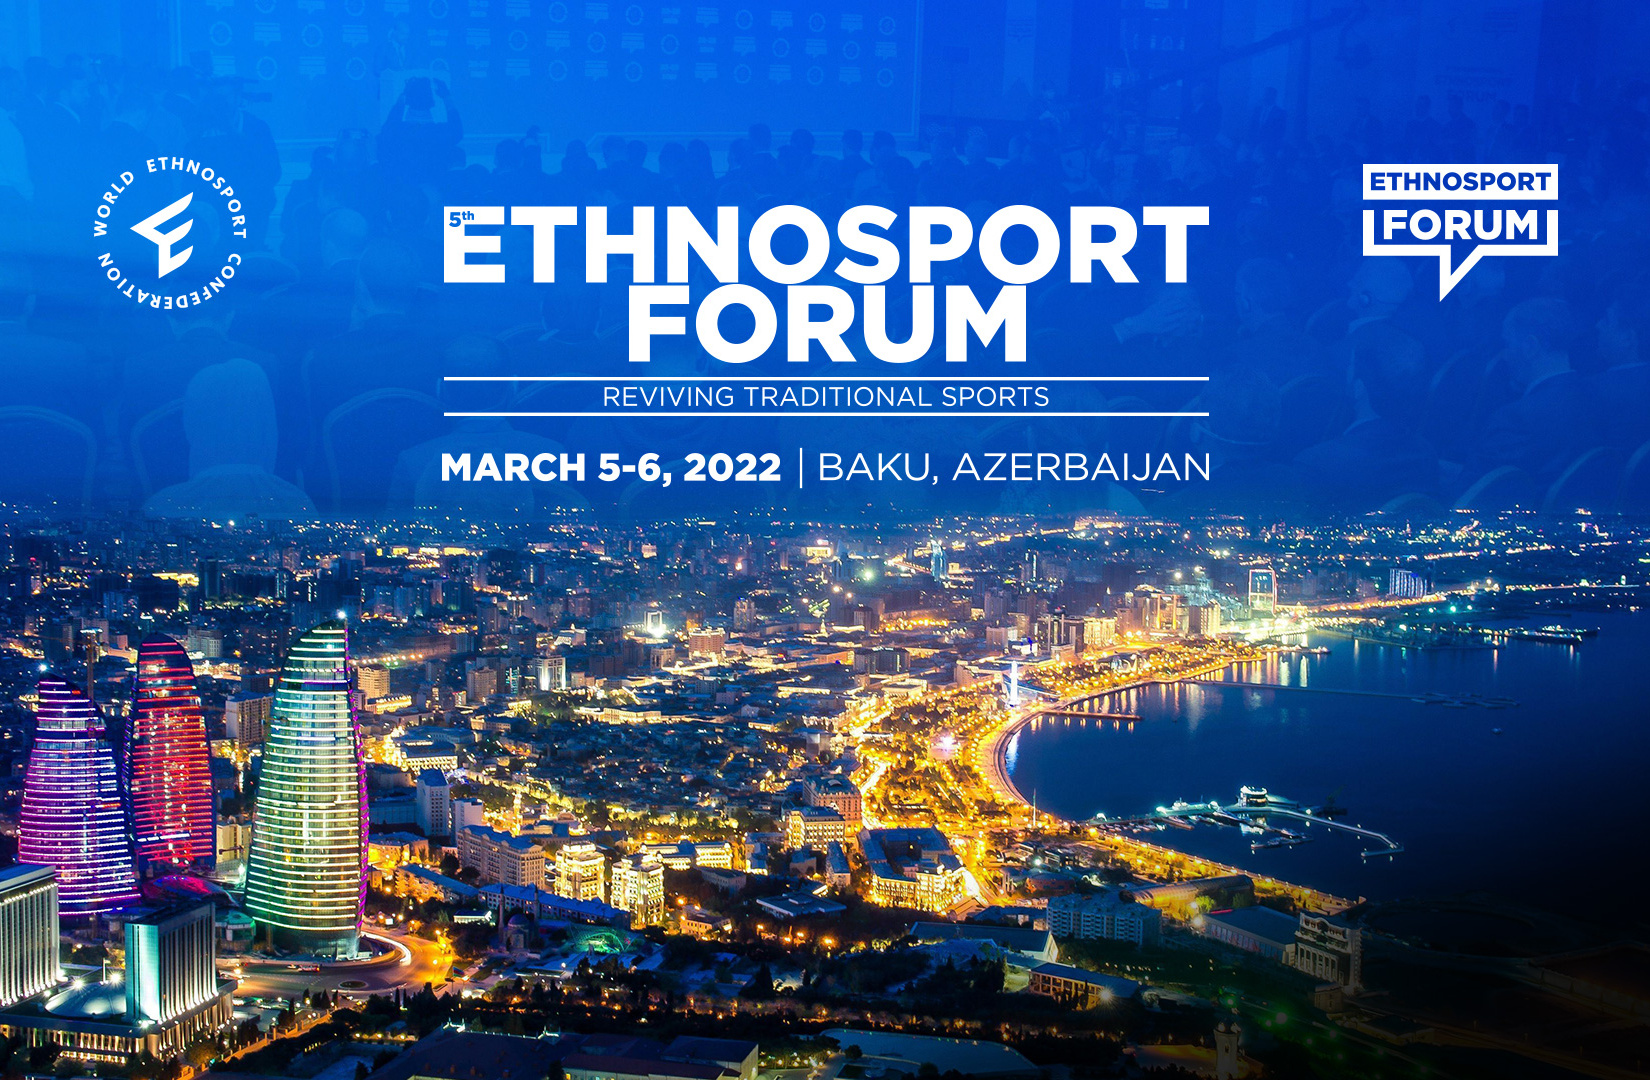 The 5th Ethnosport Forum Will Be Held in Baku on March 5-6